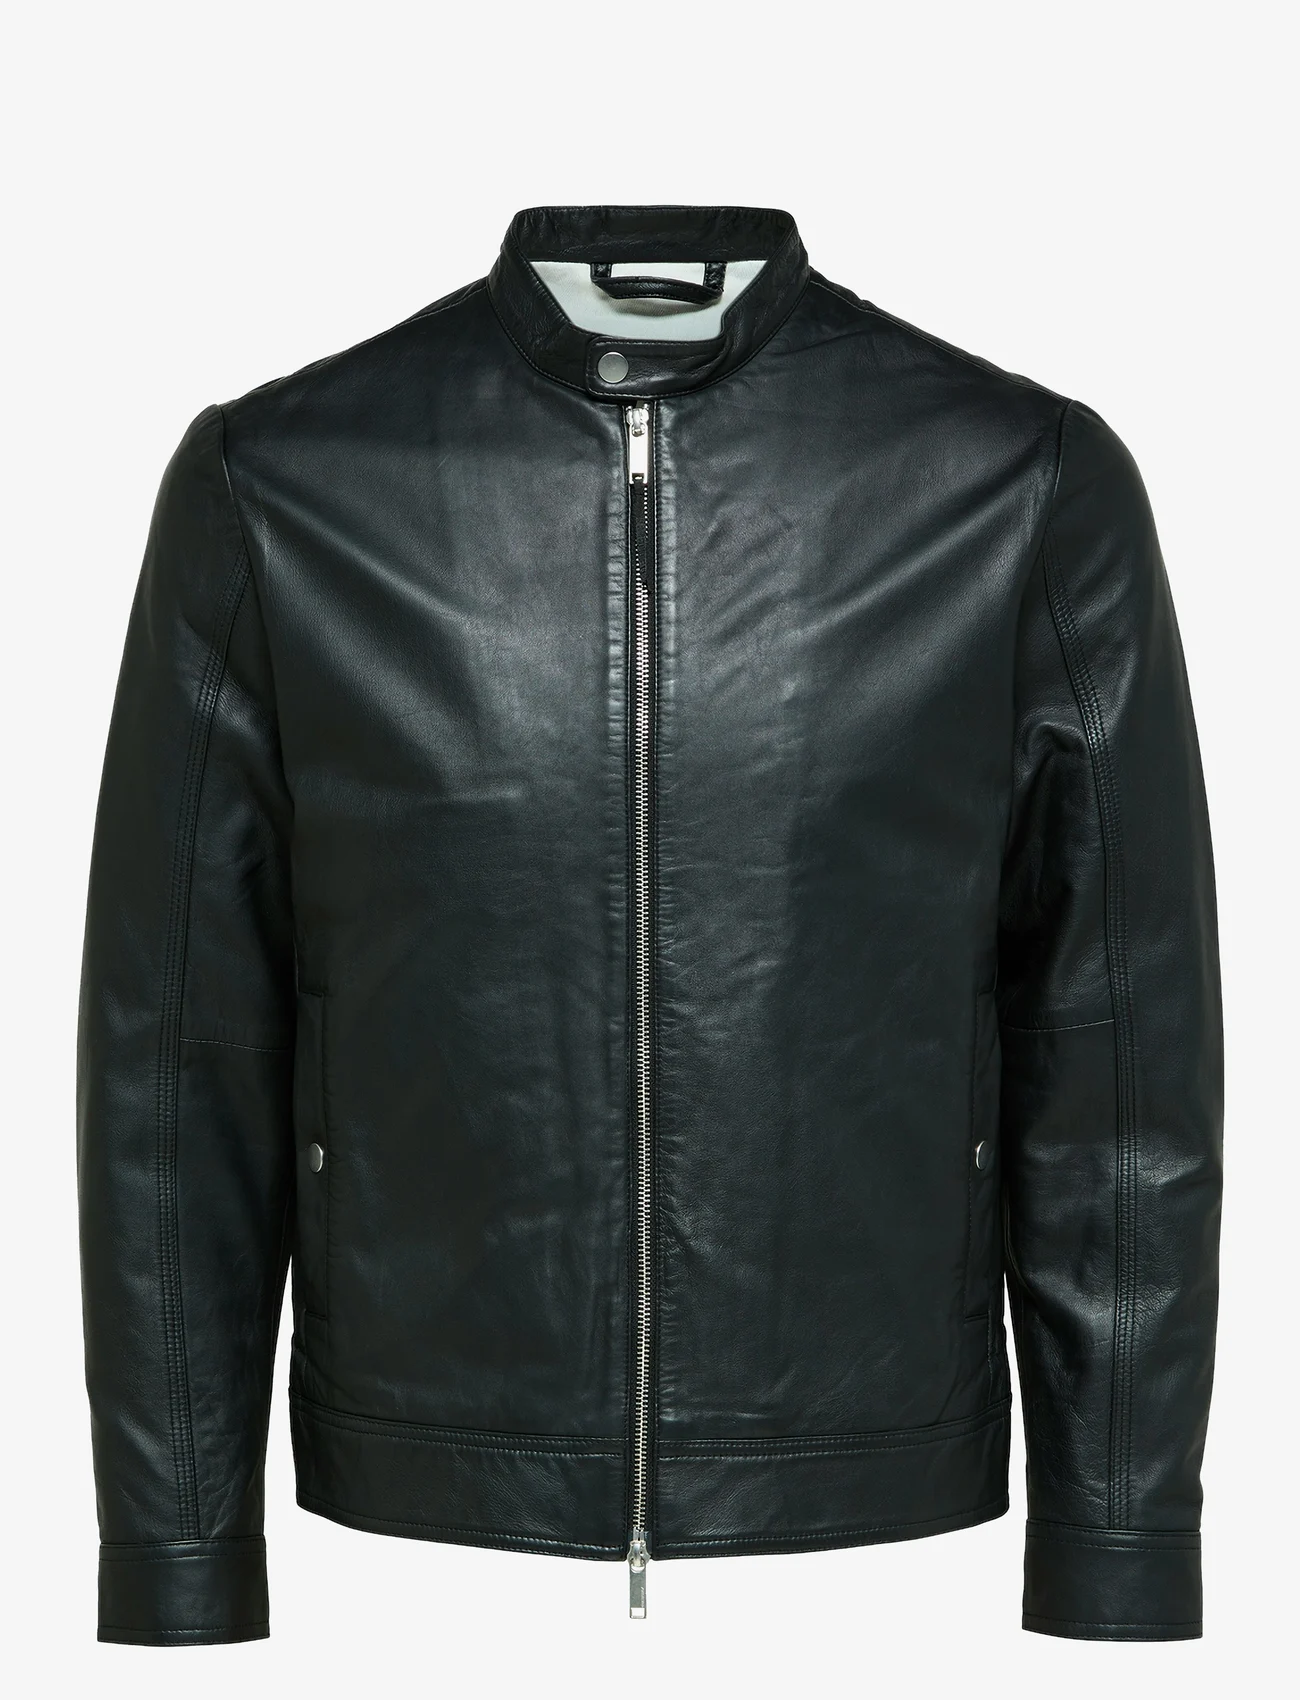 Selected Homme - SLHARCHIVE CLASSIC LEATHER JKT NOOS - spring jackets - black - 1